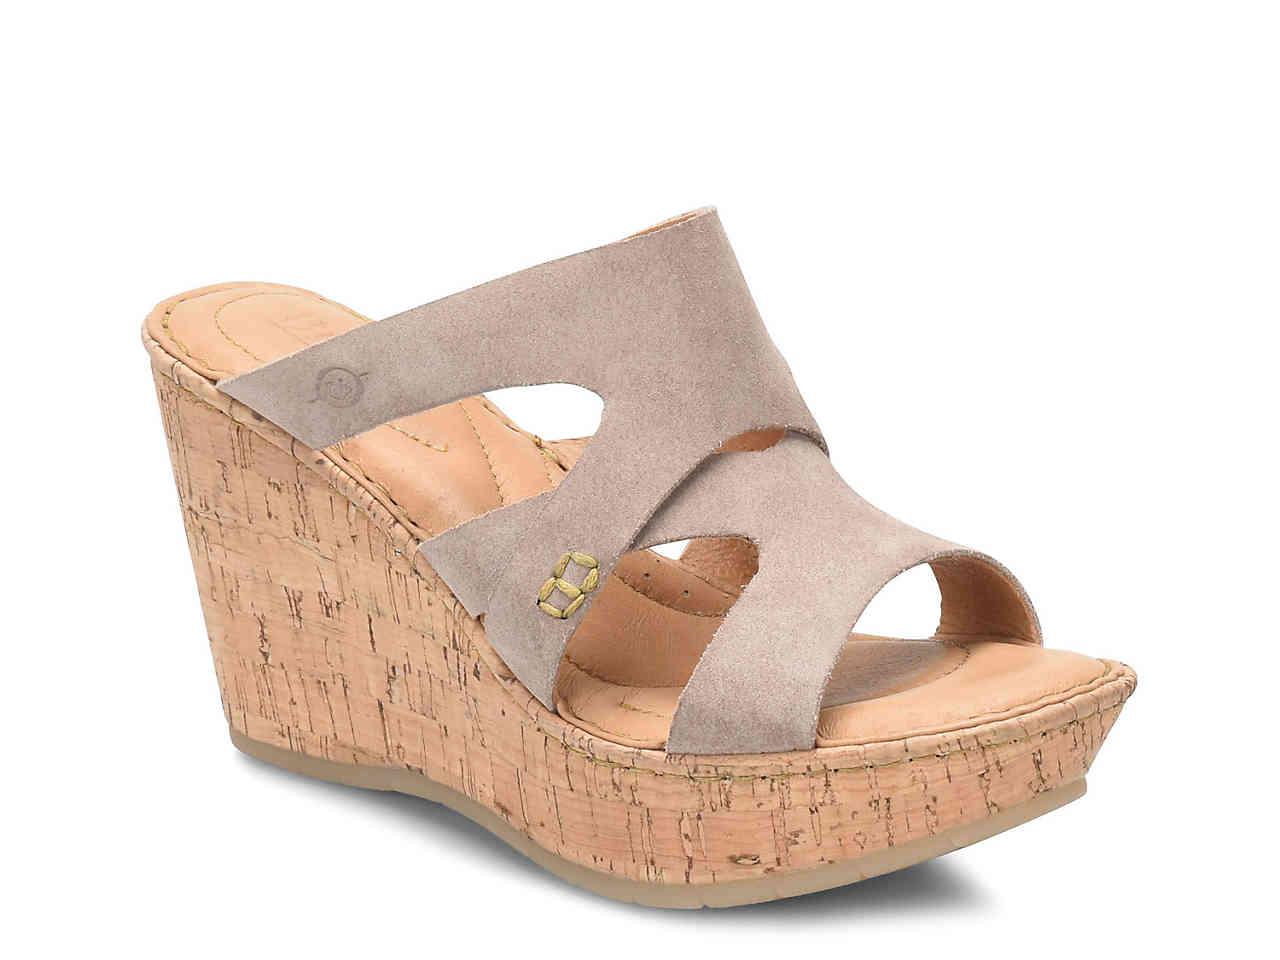 Born Suede Andreas Wedge Sandal in Grey 